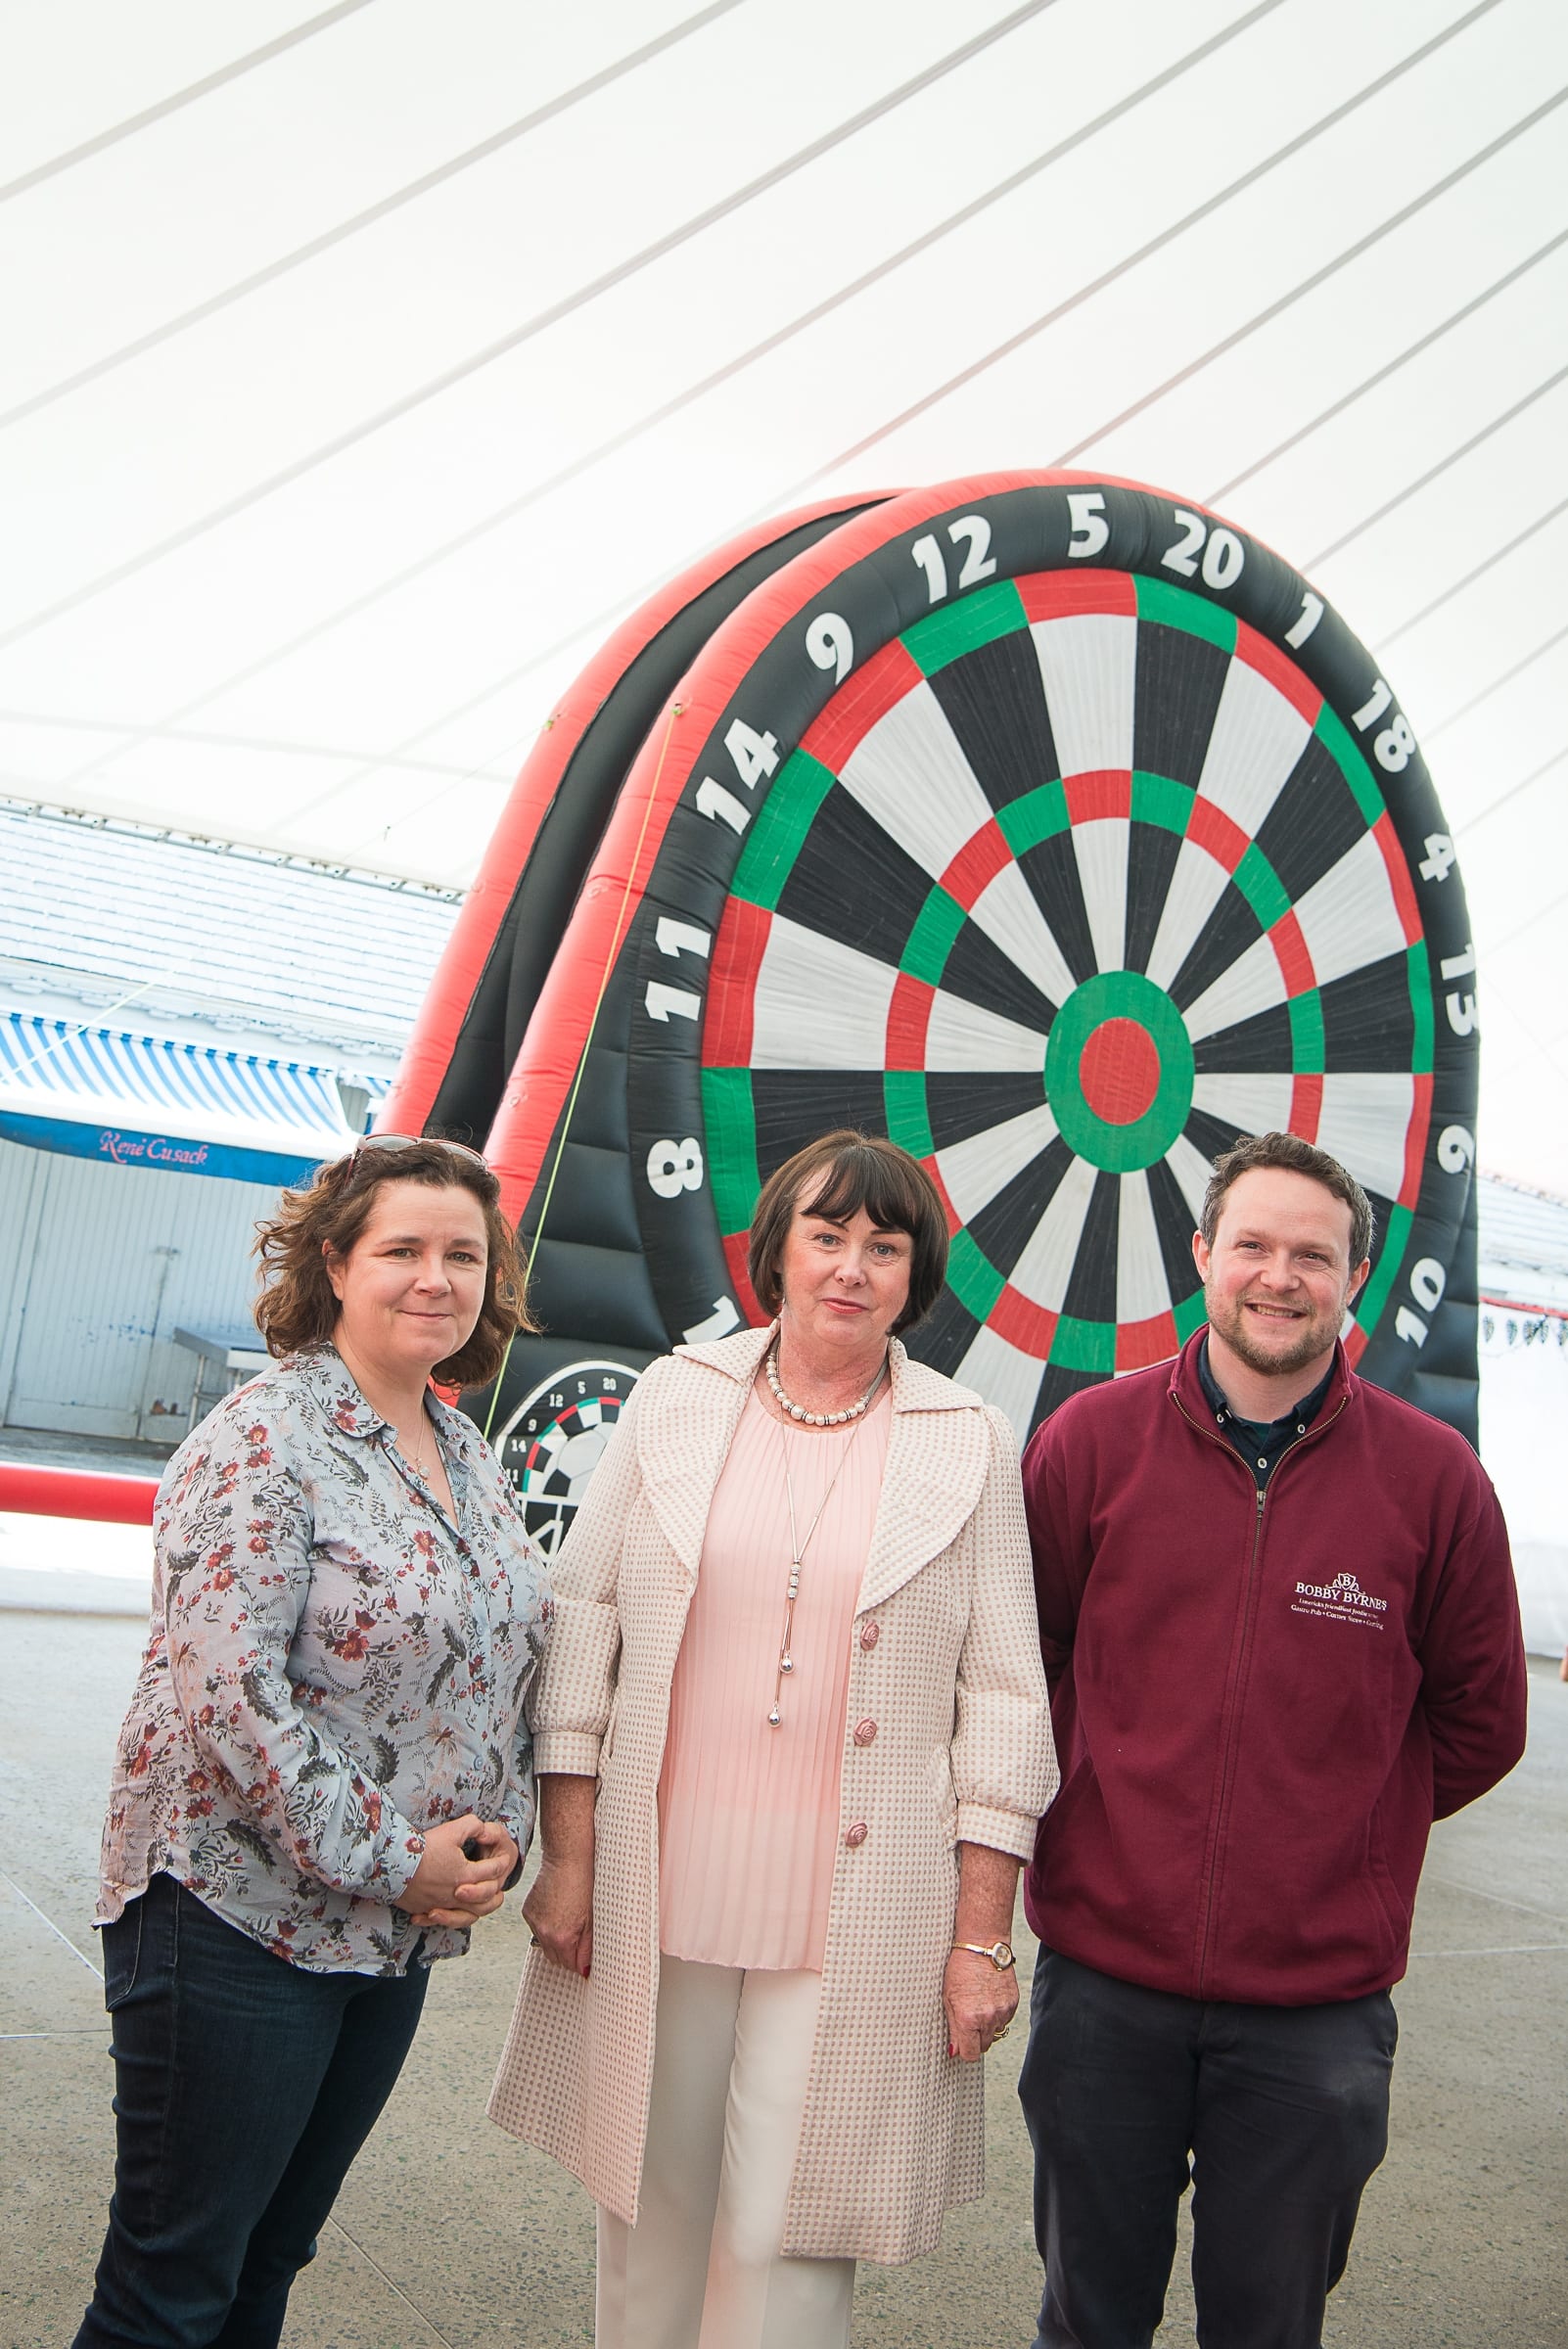 From Left to Right:  Regional Leaders BBQ which took place on the 6th June in the Limerick Milk Market:Sandra Joyce- Irish World Academy of Music and Dance, Caroline Long - CEO / Limerick and  District Credit Union, Stephen Byrne - Bobby Byrne Catering 
Photo by Morning Star Photography